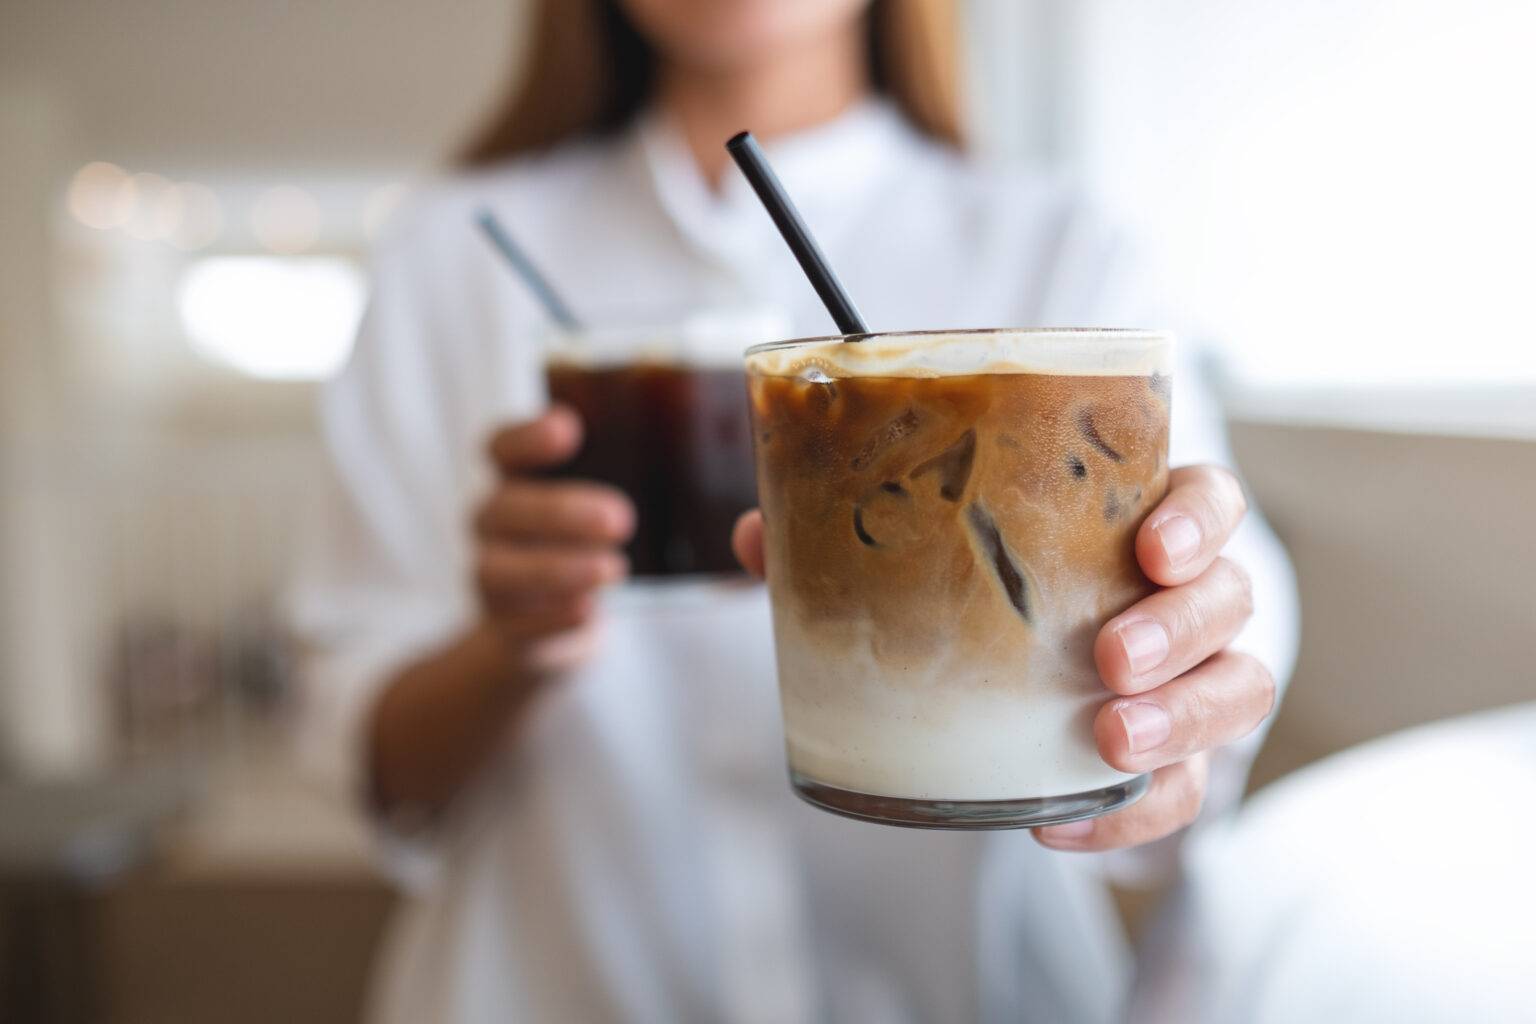 How to make the perfect iced coffee at home – tips from a barista